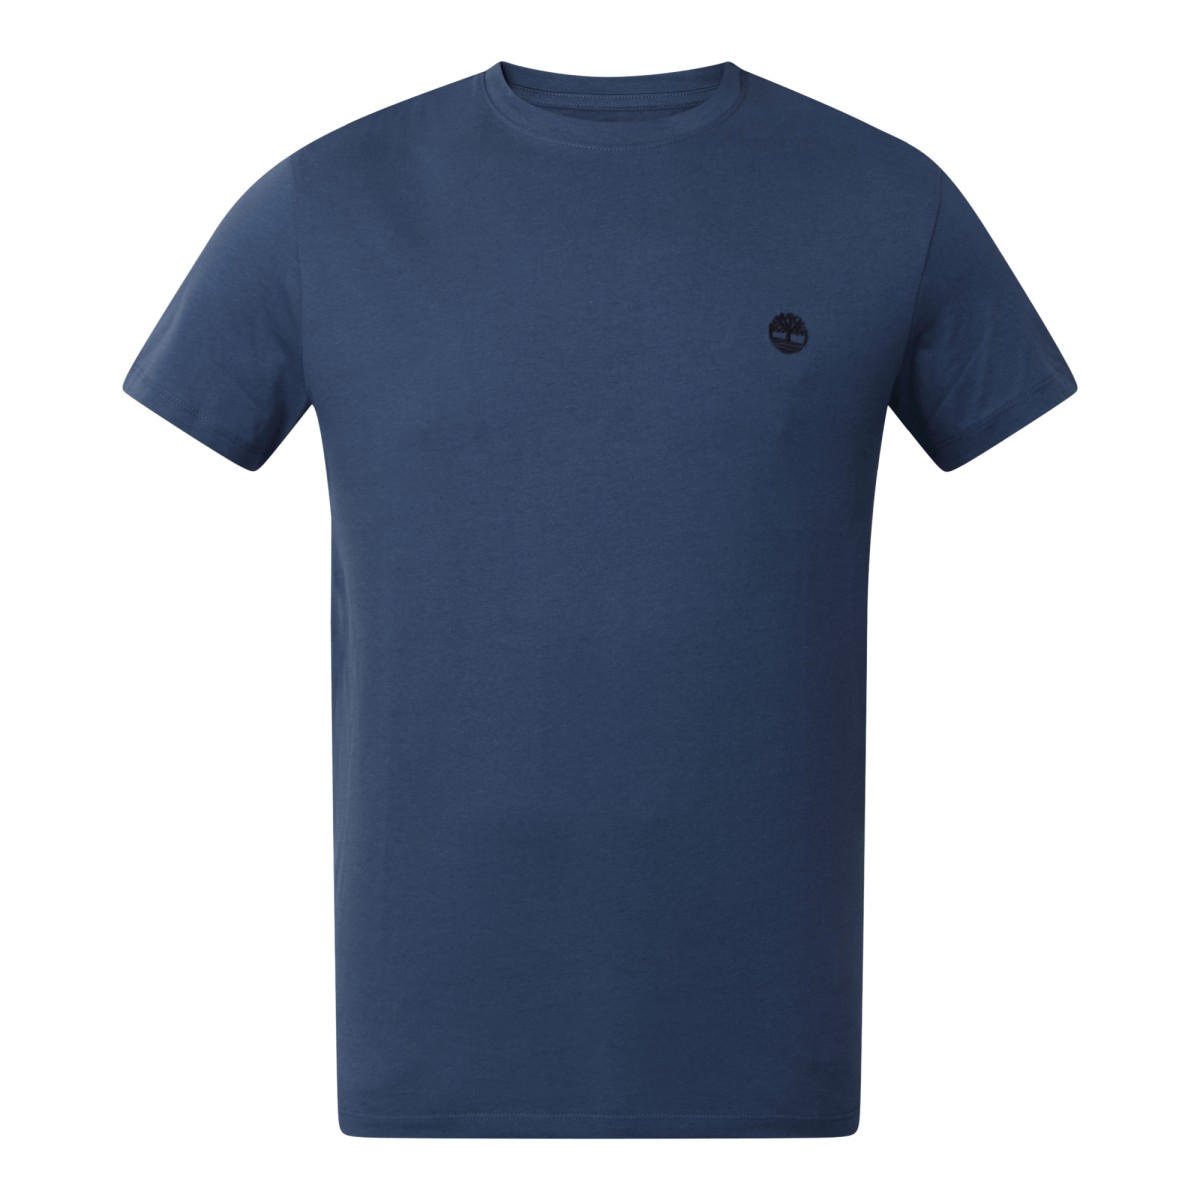 Timberland OUSTER RIVER LOGO TEE Μπλε Γκρι